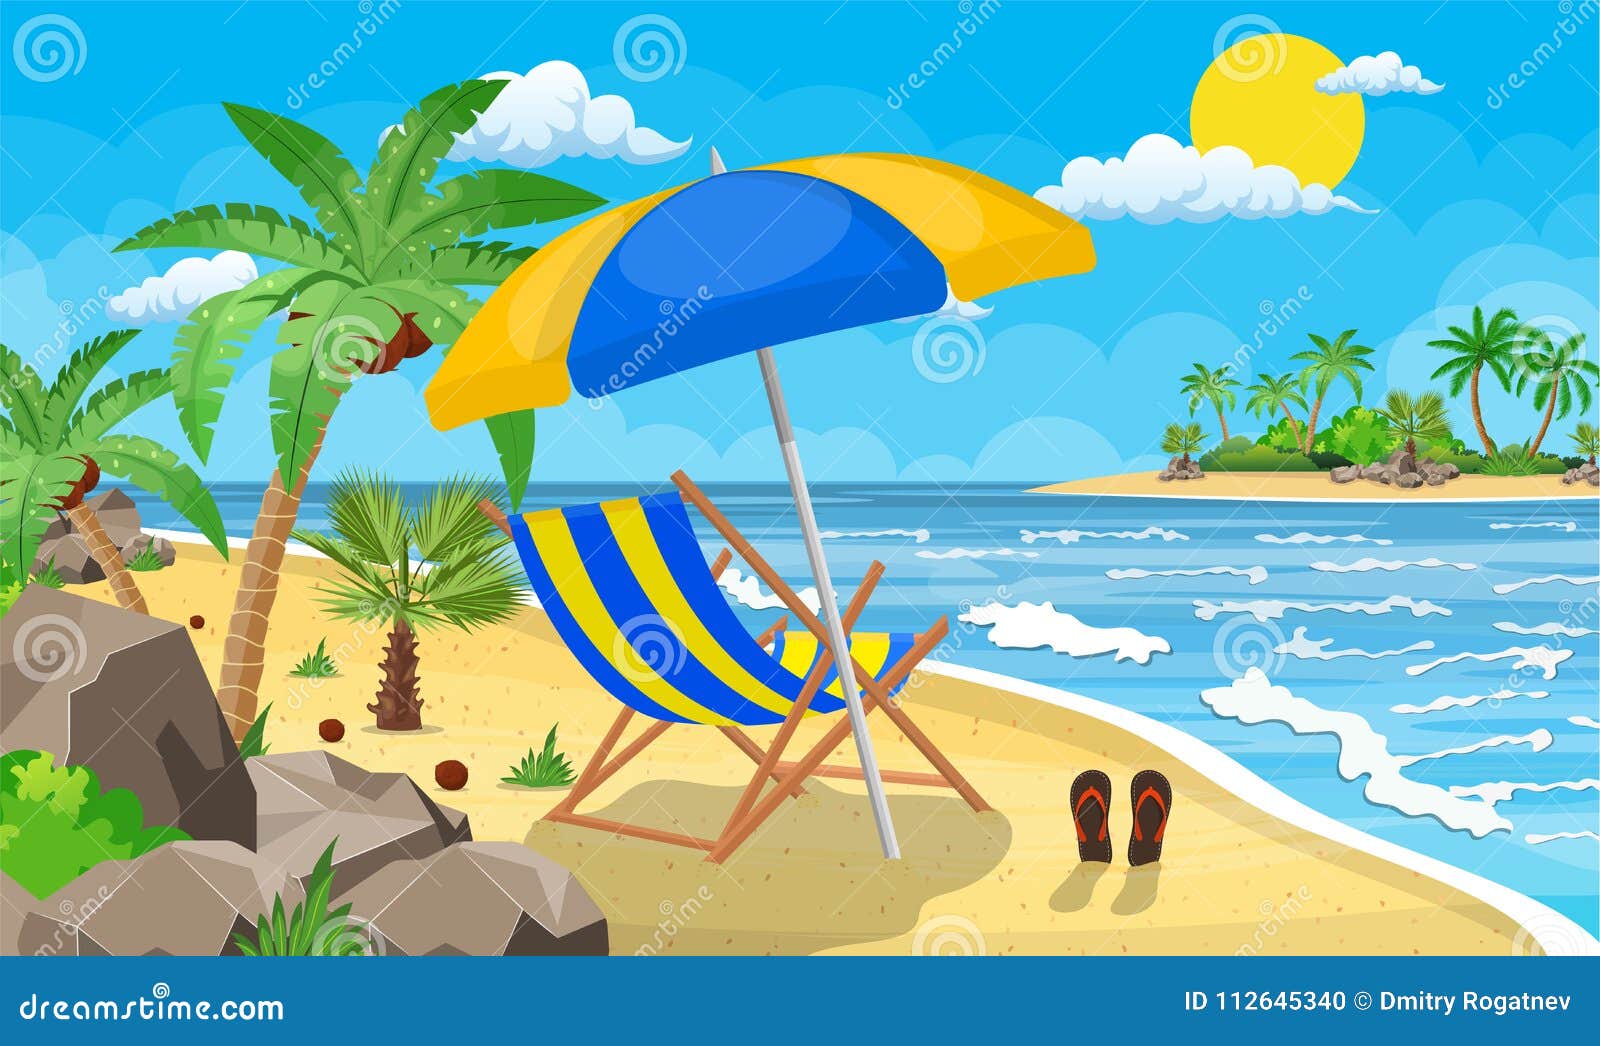 Landscape of Wooden Chaise Lounge, Stock Vector - Illustration of ...